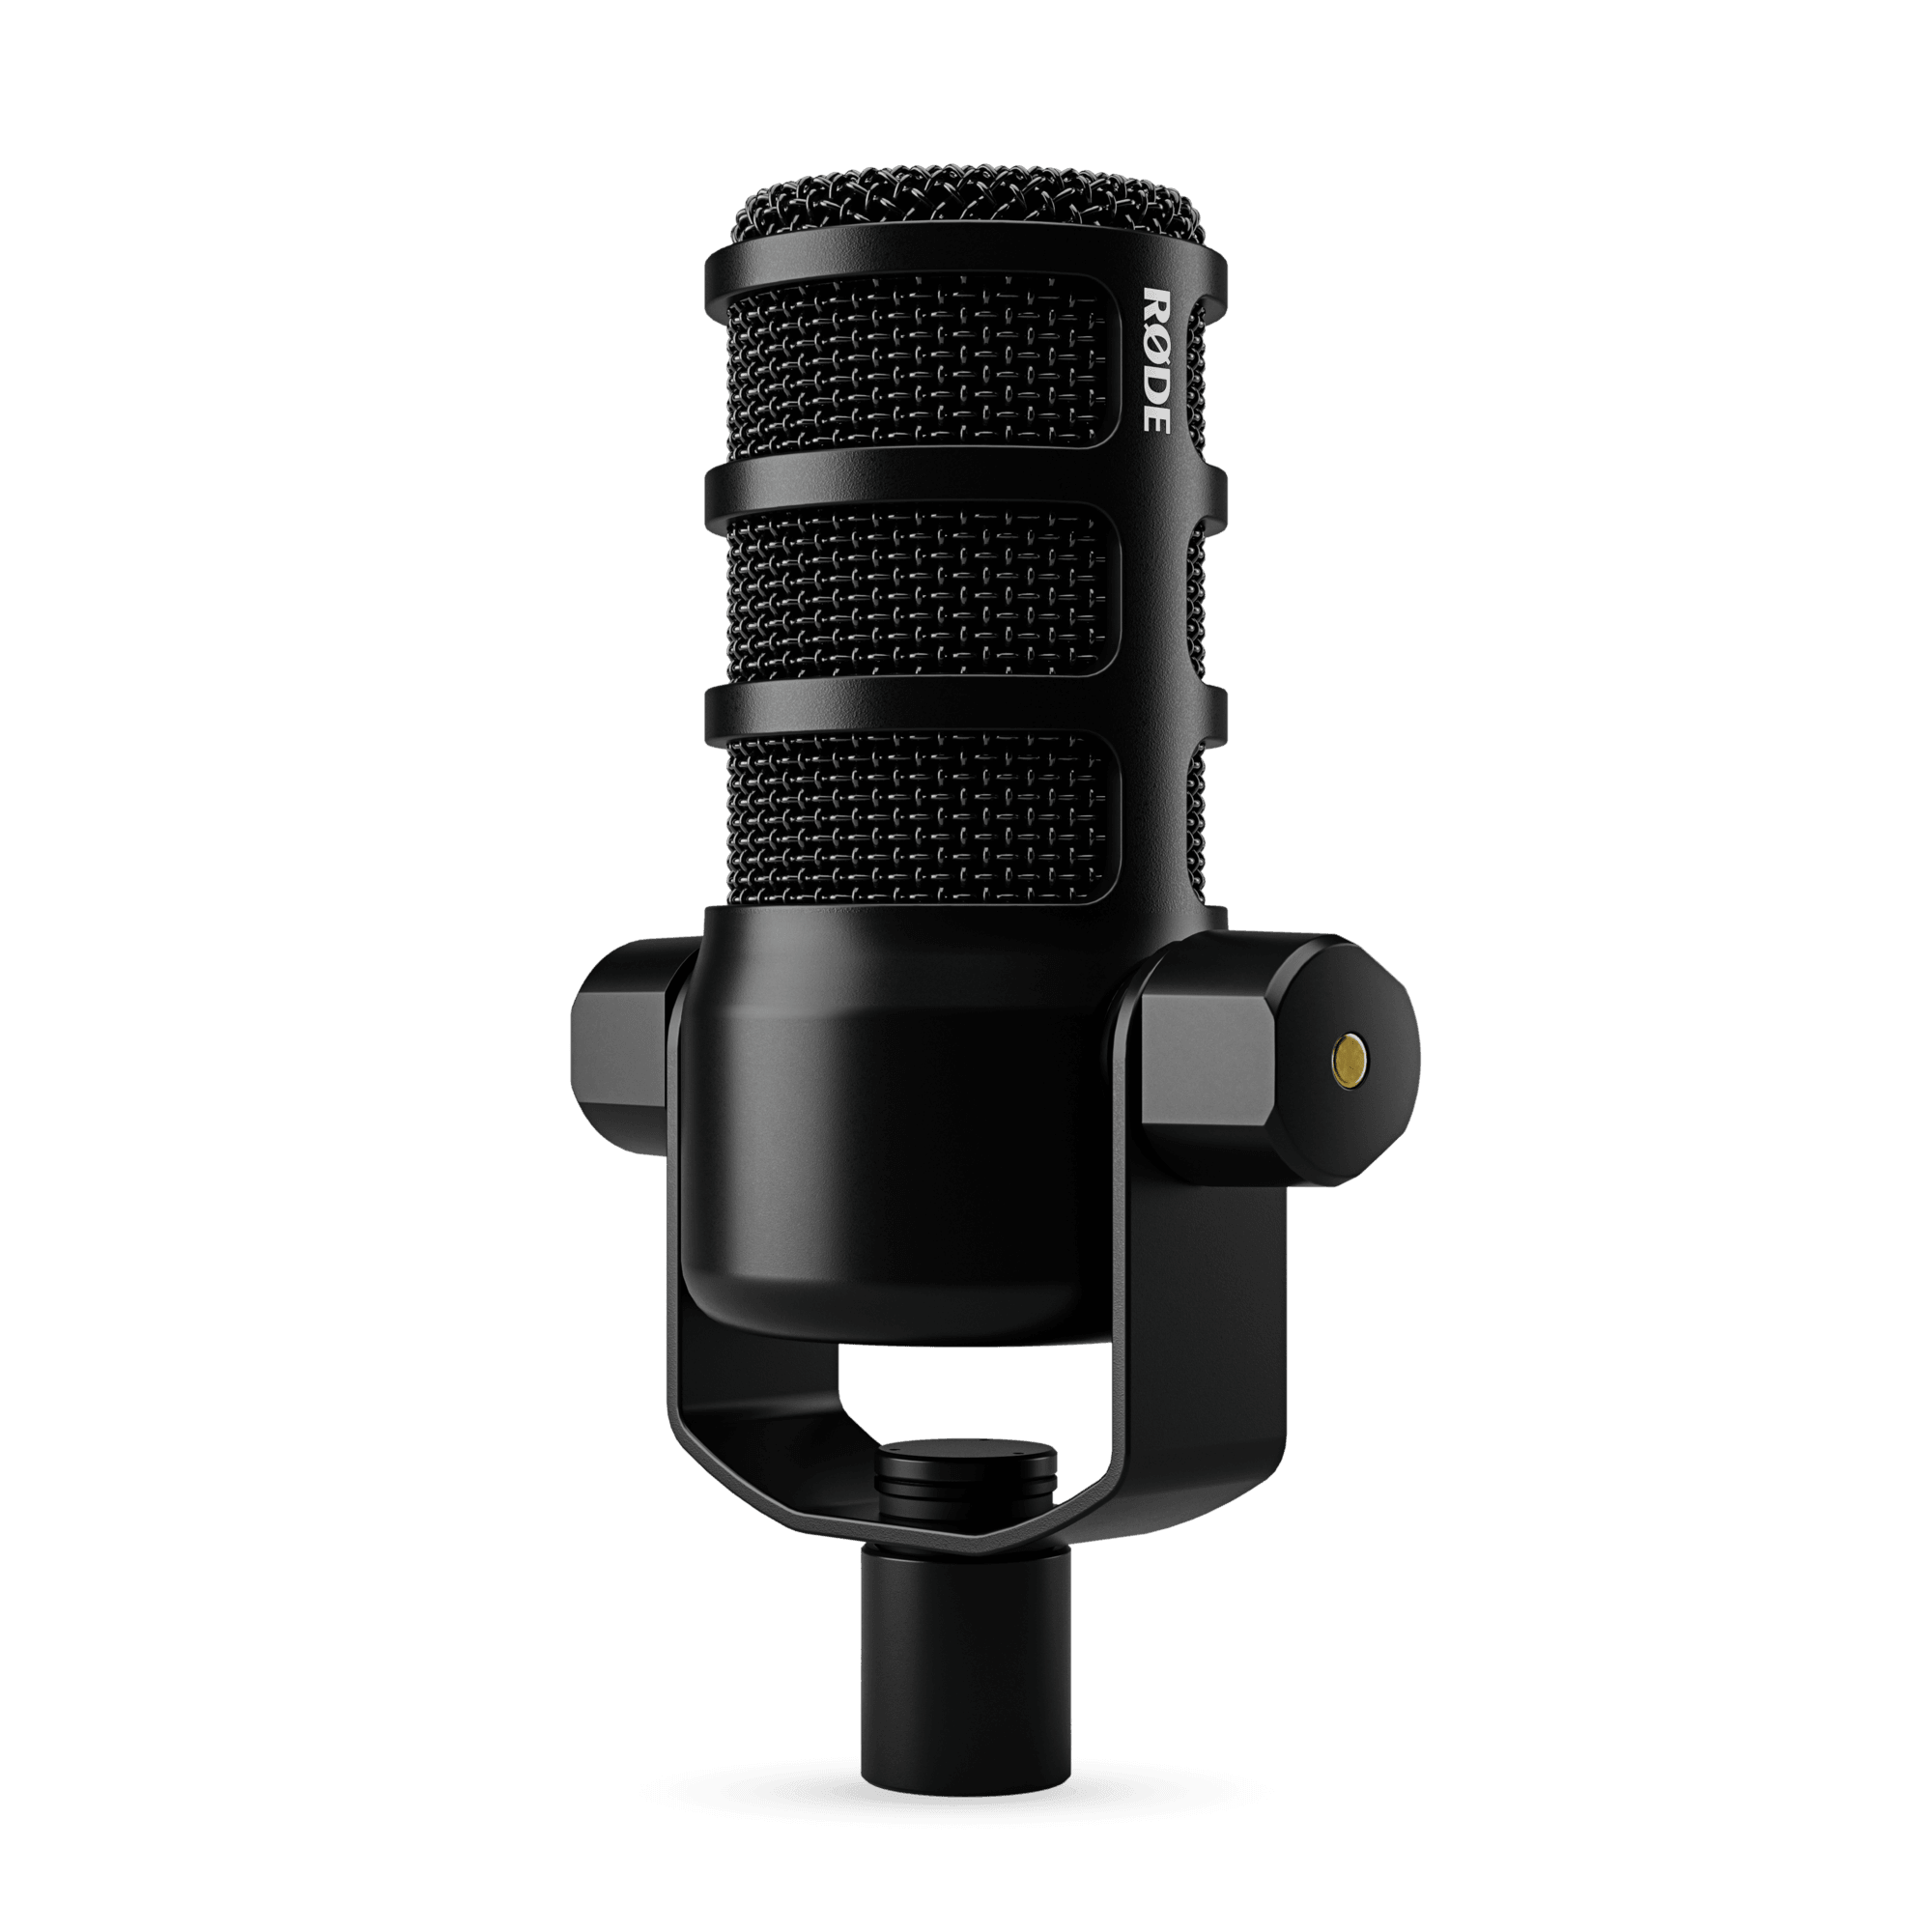 PodMic USB Versatile Dynamic Broadcast Microphone - Live & Recording by RODE at Muso's Stuff